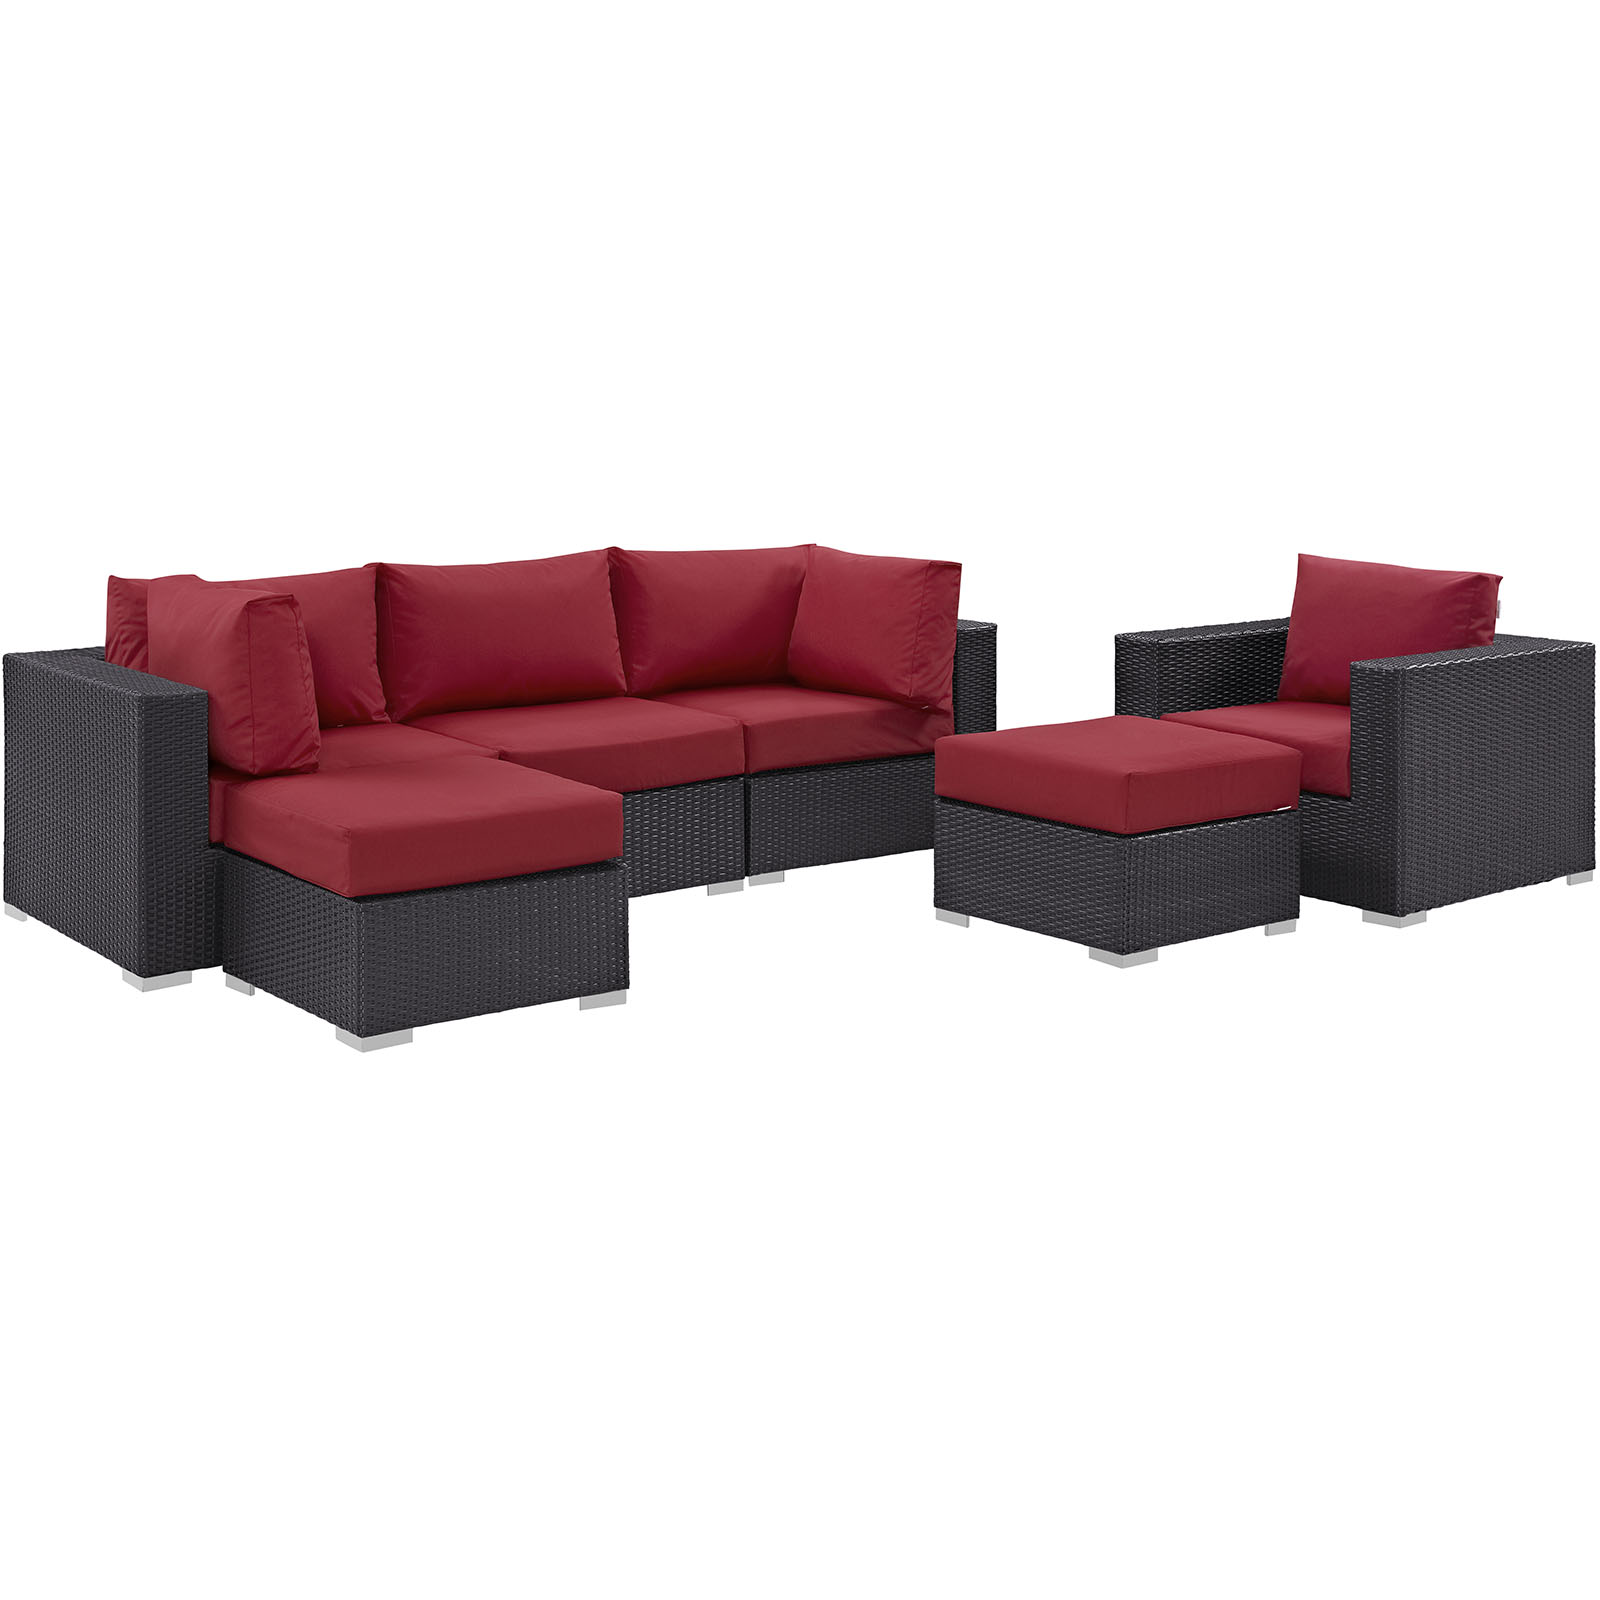 Modway Convene 6 Piece Patio Sofa Set in Espresso and Red - image 2 of 8